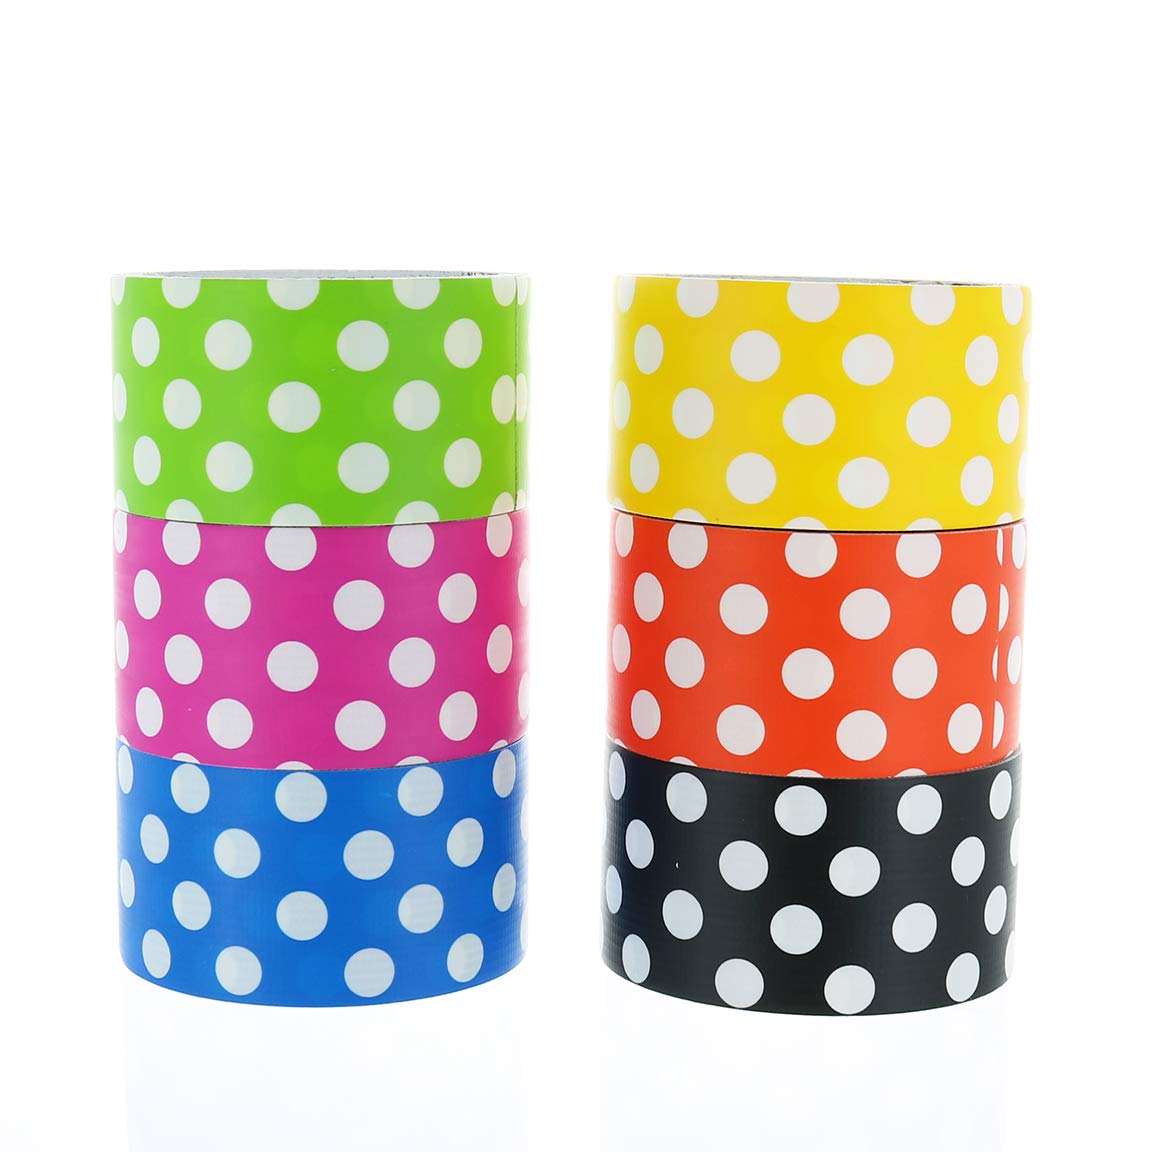 GIFTEXPRESS Assorted Colored Duct Tapes, Polka Dot Duct Tapes (Pack of 6)